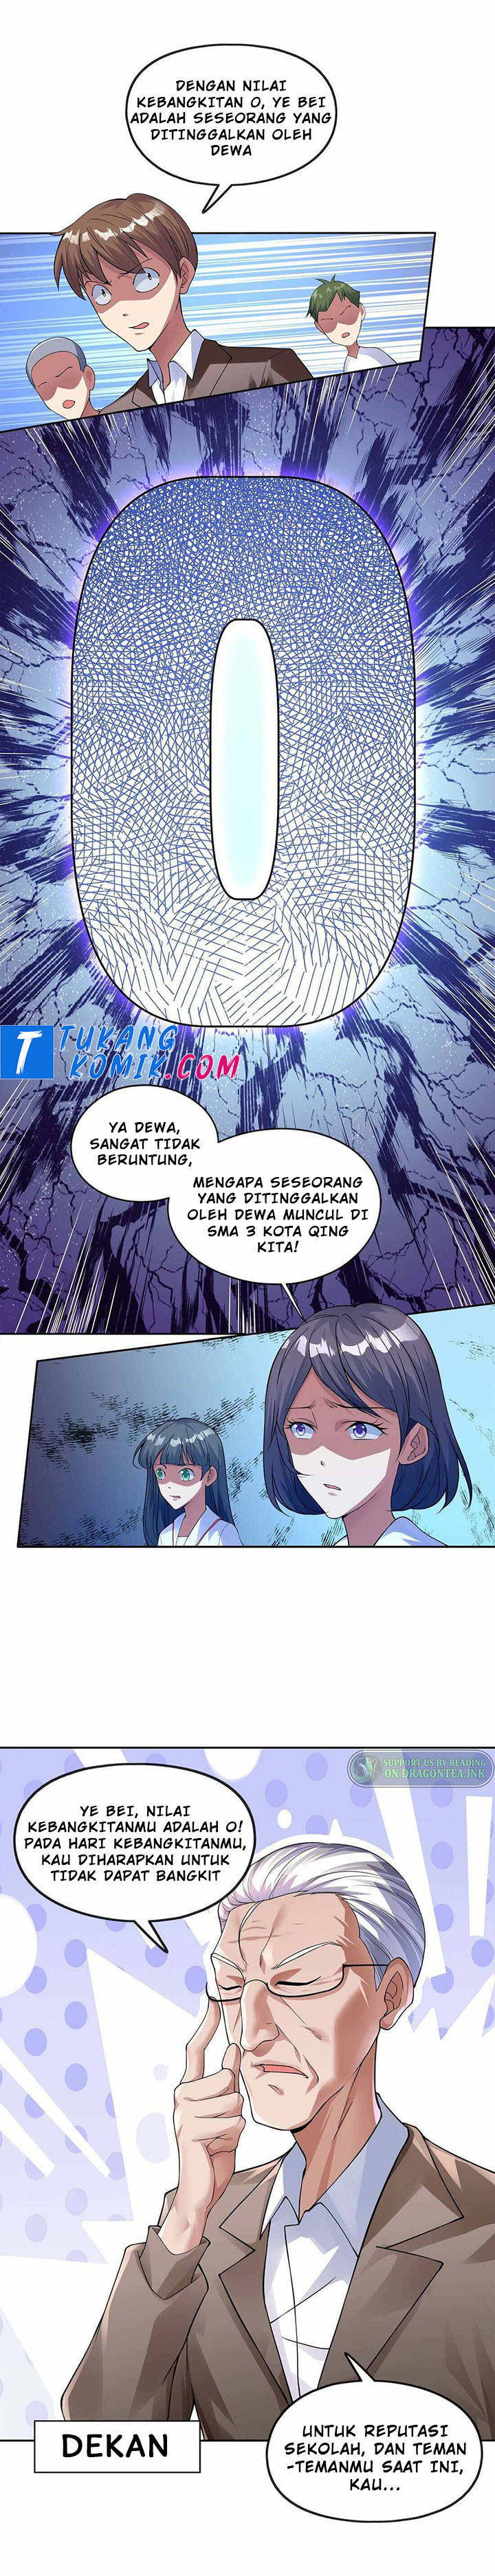 Dilarang COPAS - situs resmi www.mangacanblog.com - Komik age of the gods the world becomes an online game 000 - chapter 0 1 Indonesia age of the gods the world becomes an online game 000 - chapter 0 Terbaru 5|Baca Manga Komik Indonesia|Mangacan